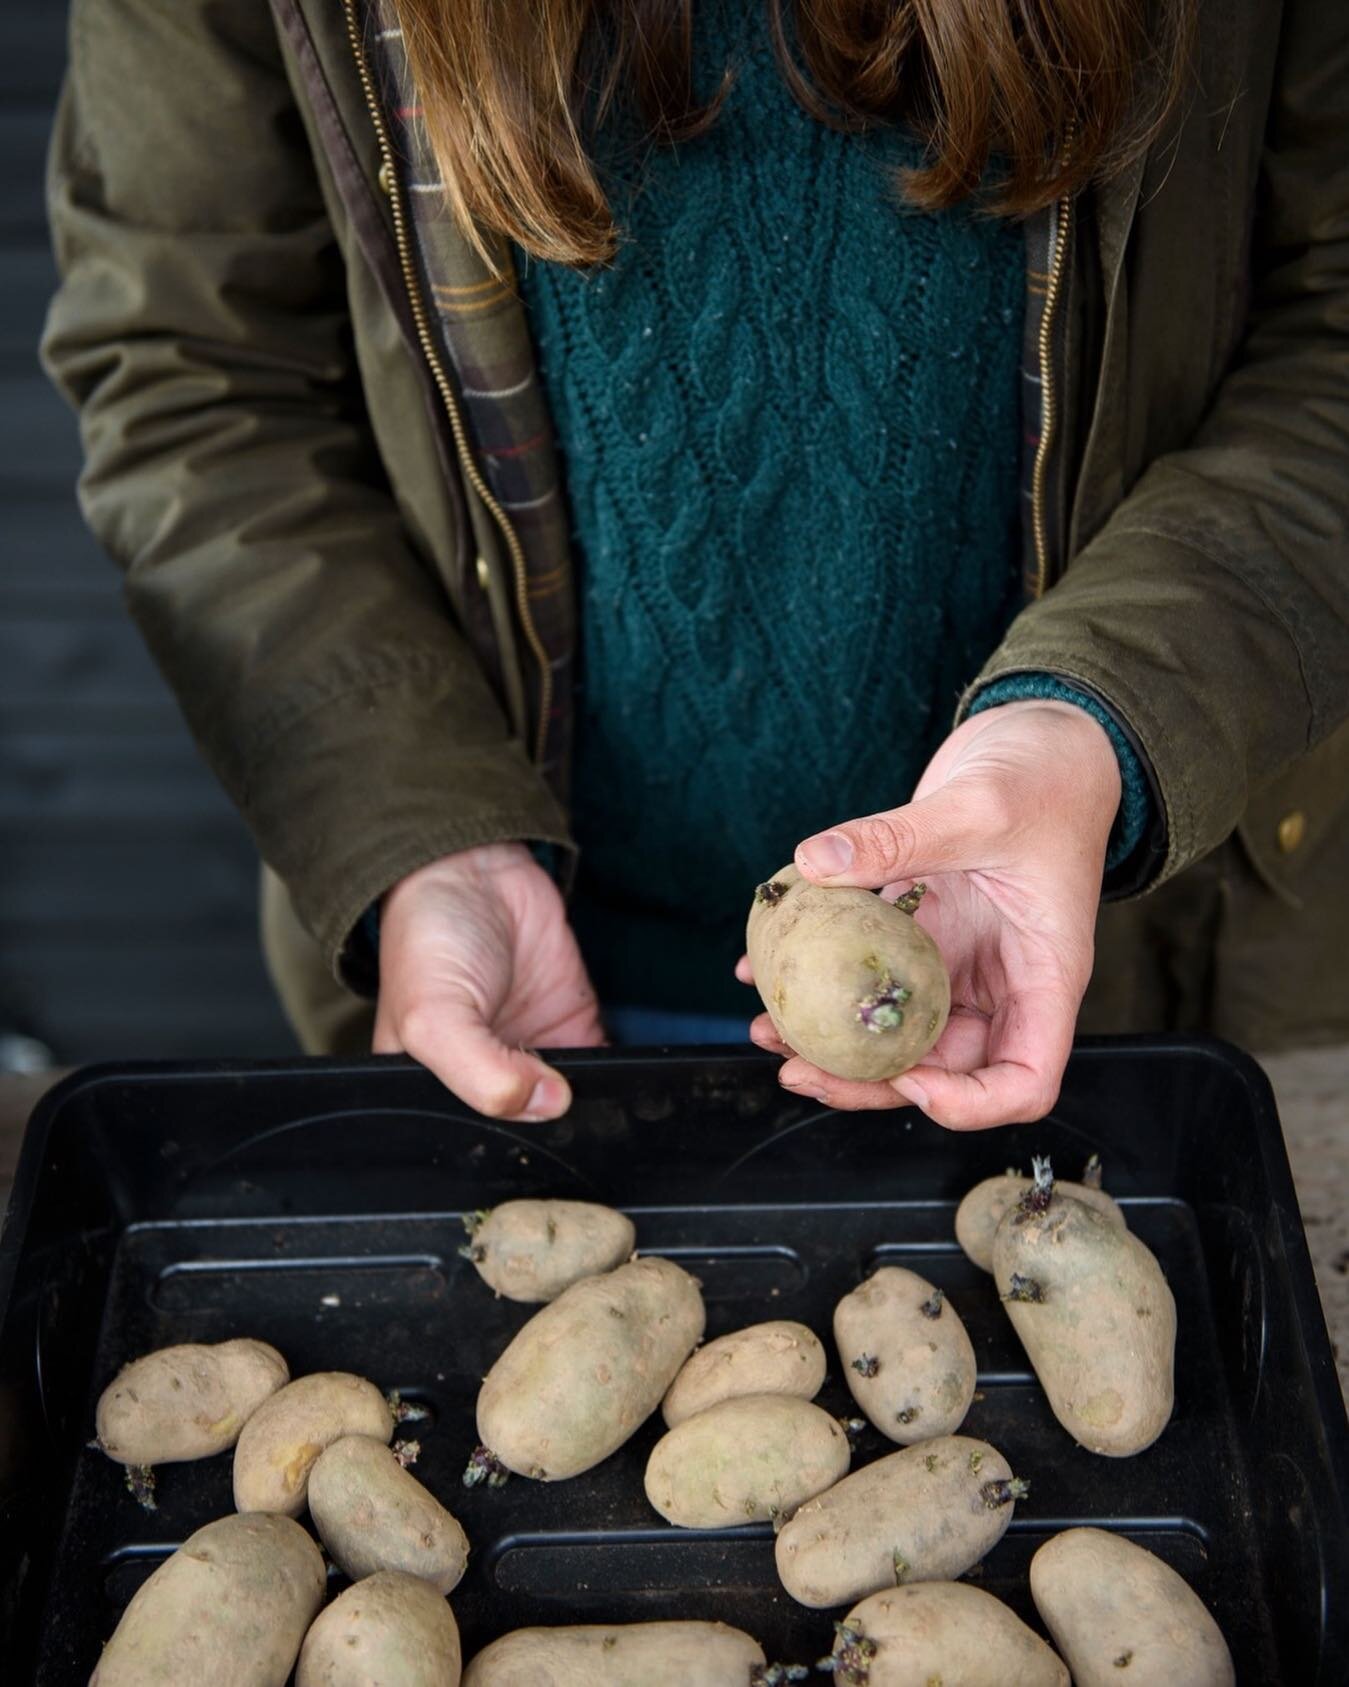 We&rsquo;re quite new to growing potatoes, and have only been growing our own for the last year or two. We&rsquo;ve found it easiest to grow them in big pots, filling over the top with compost as the stems shoot upwards&hellip;(There is something ver